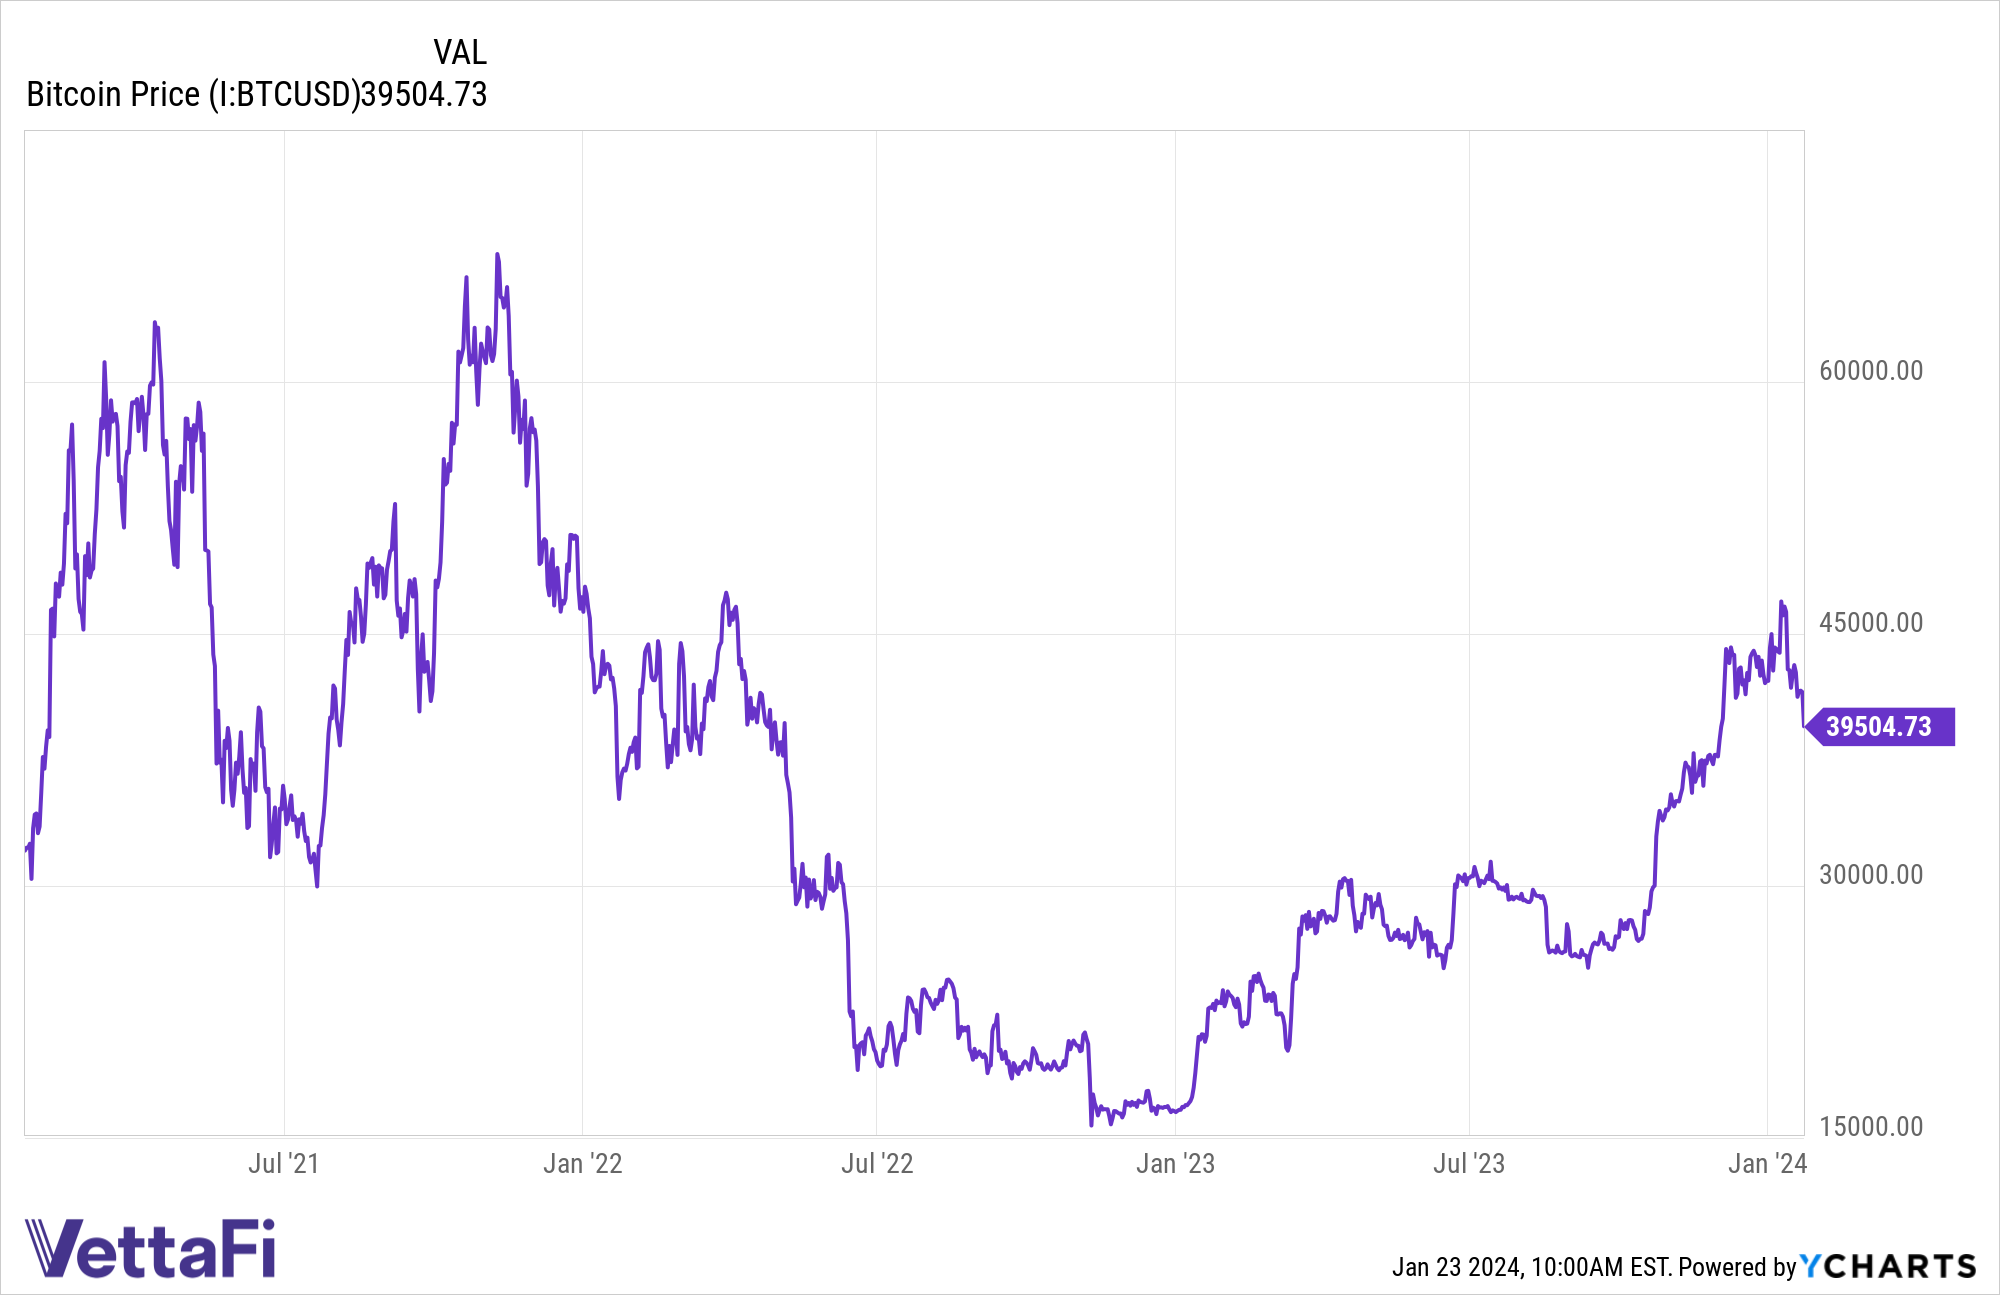 Price chart of bitcoin from January 2021 until January 2024